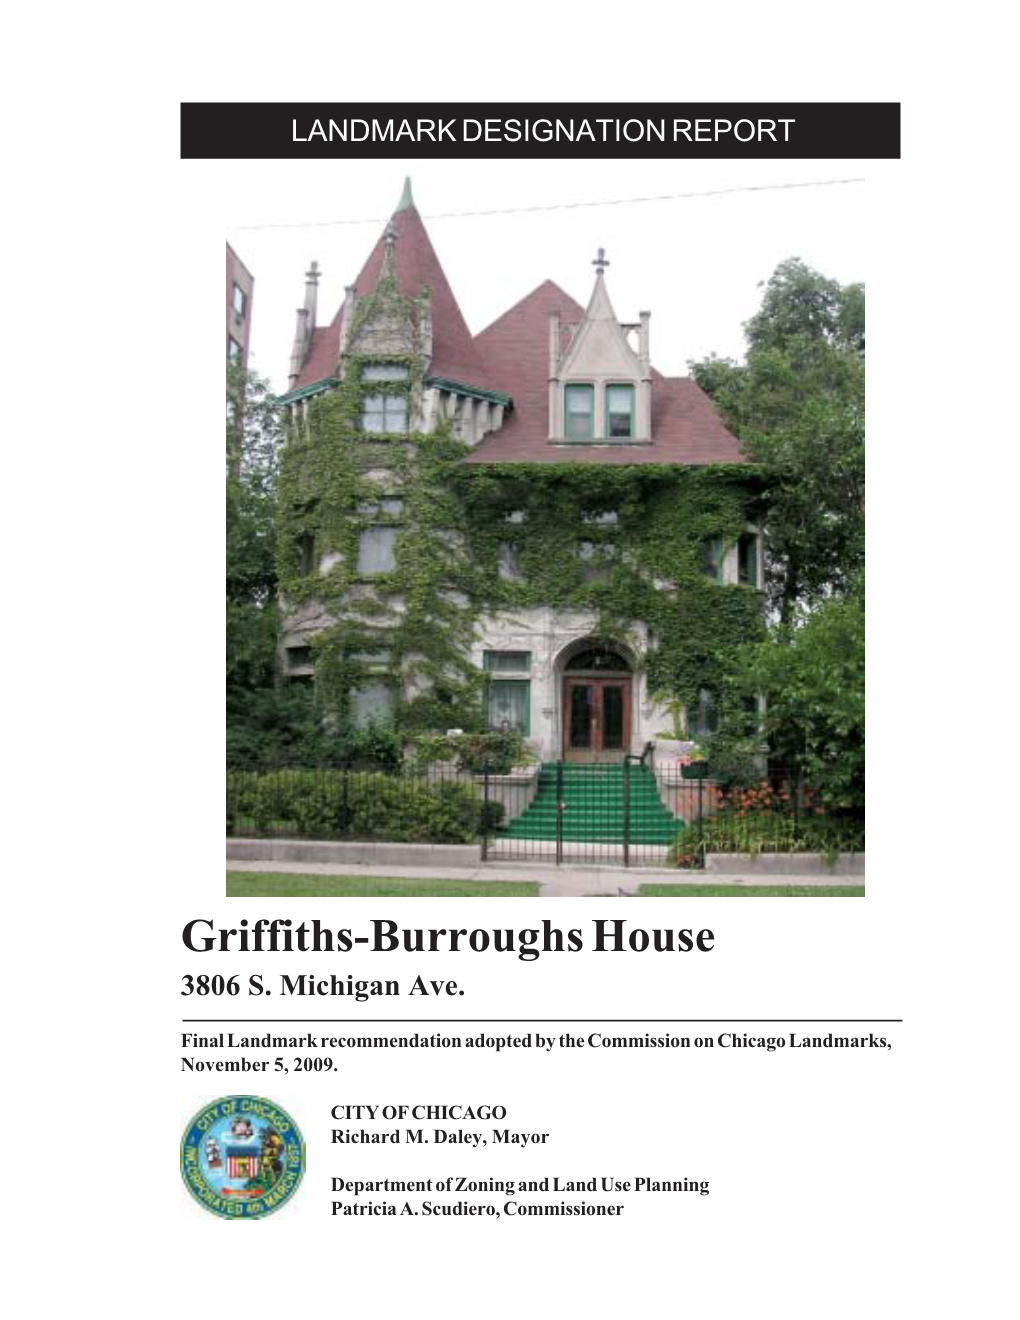 Griffiths-Burroughs House 3806 S